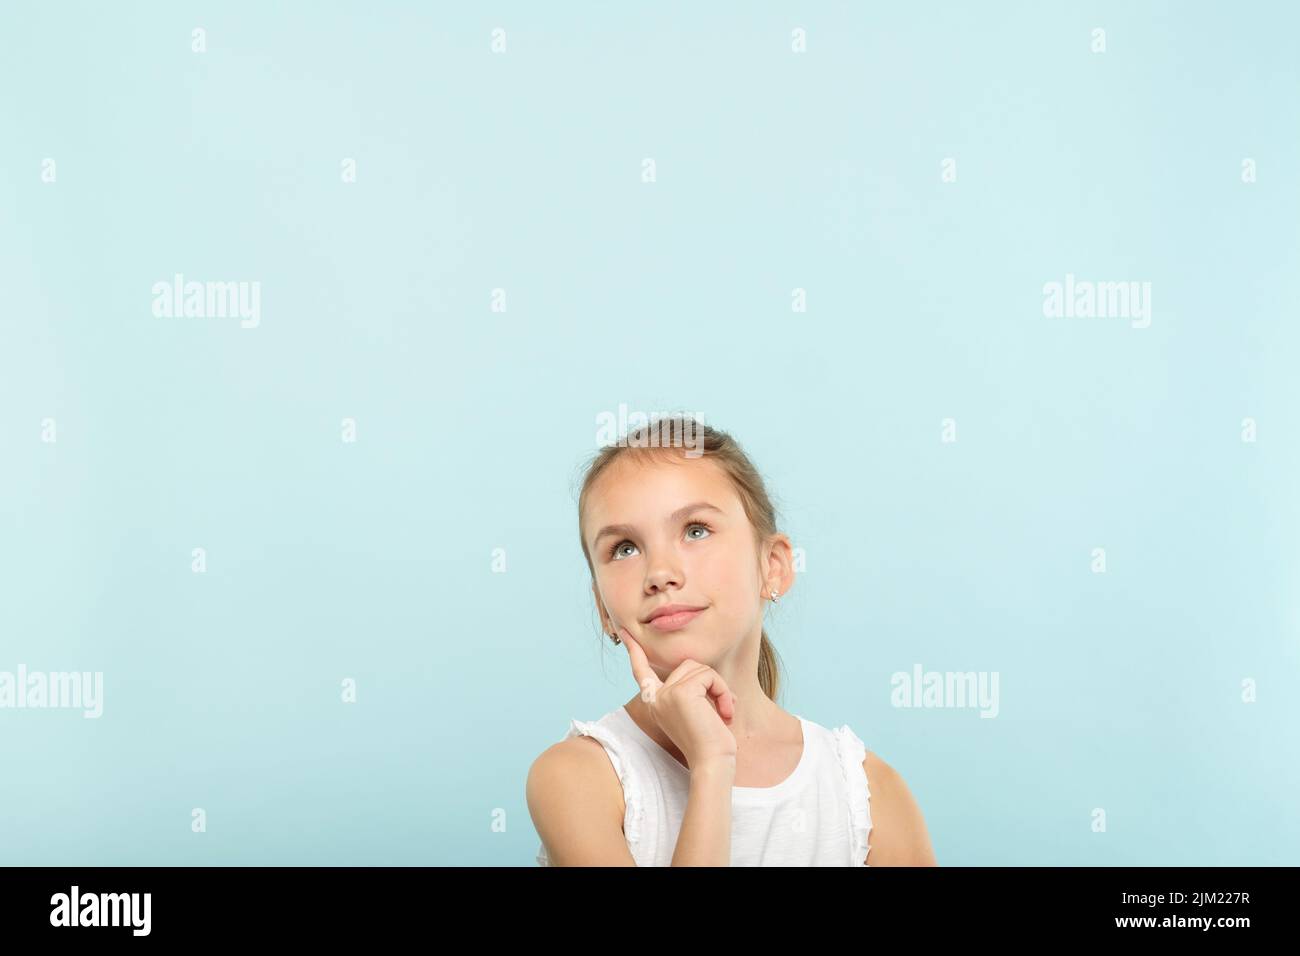 smiling dreamy girl look up advertising space Stock Photo